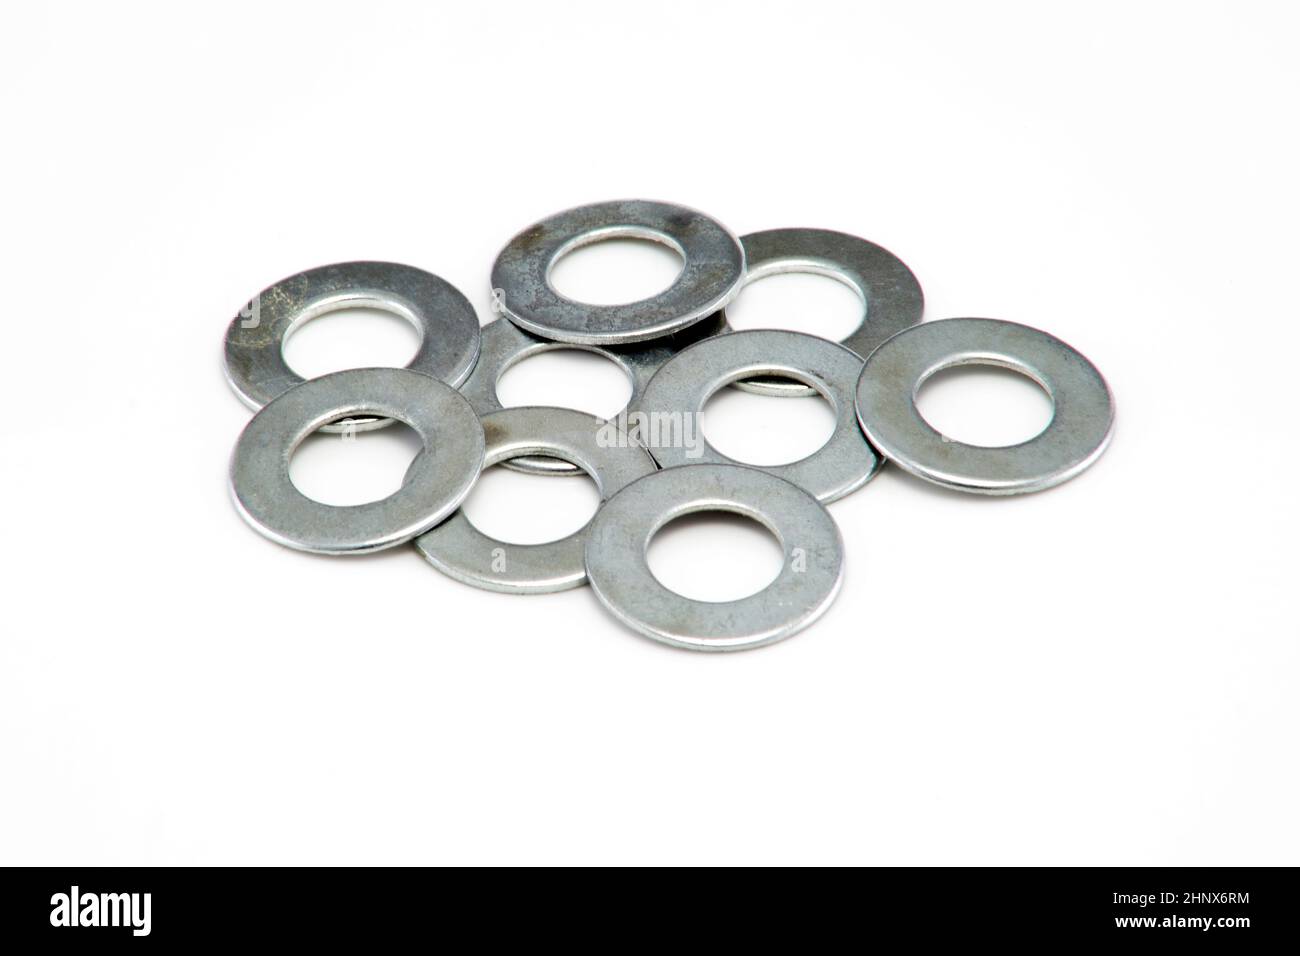 A pile of 18mm washers of background image Stock Photo